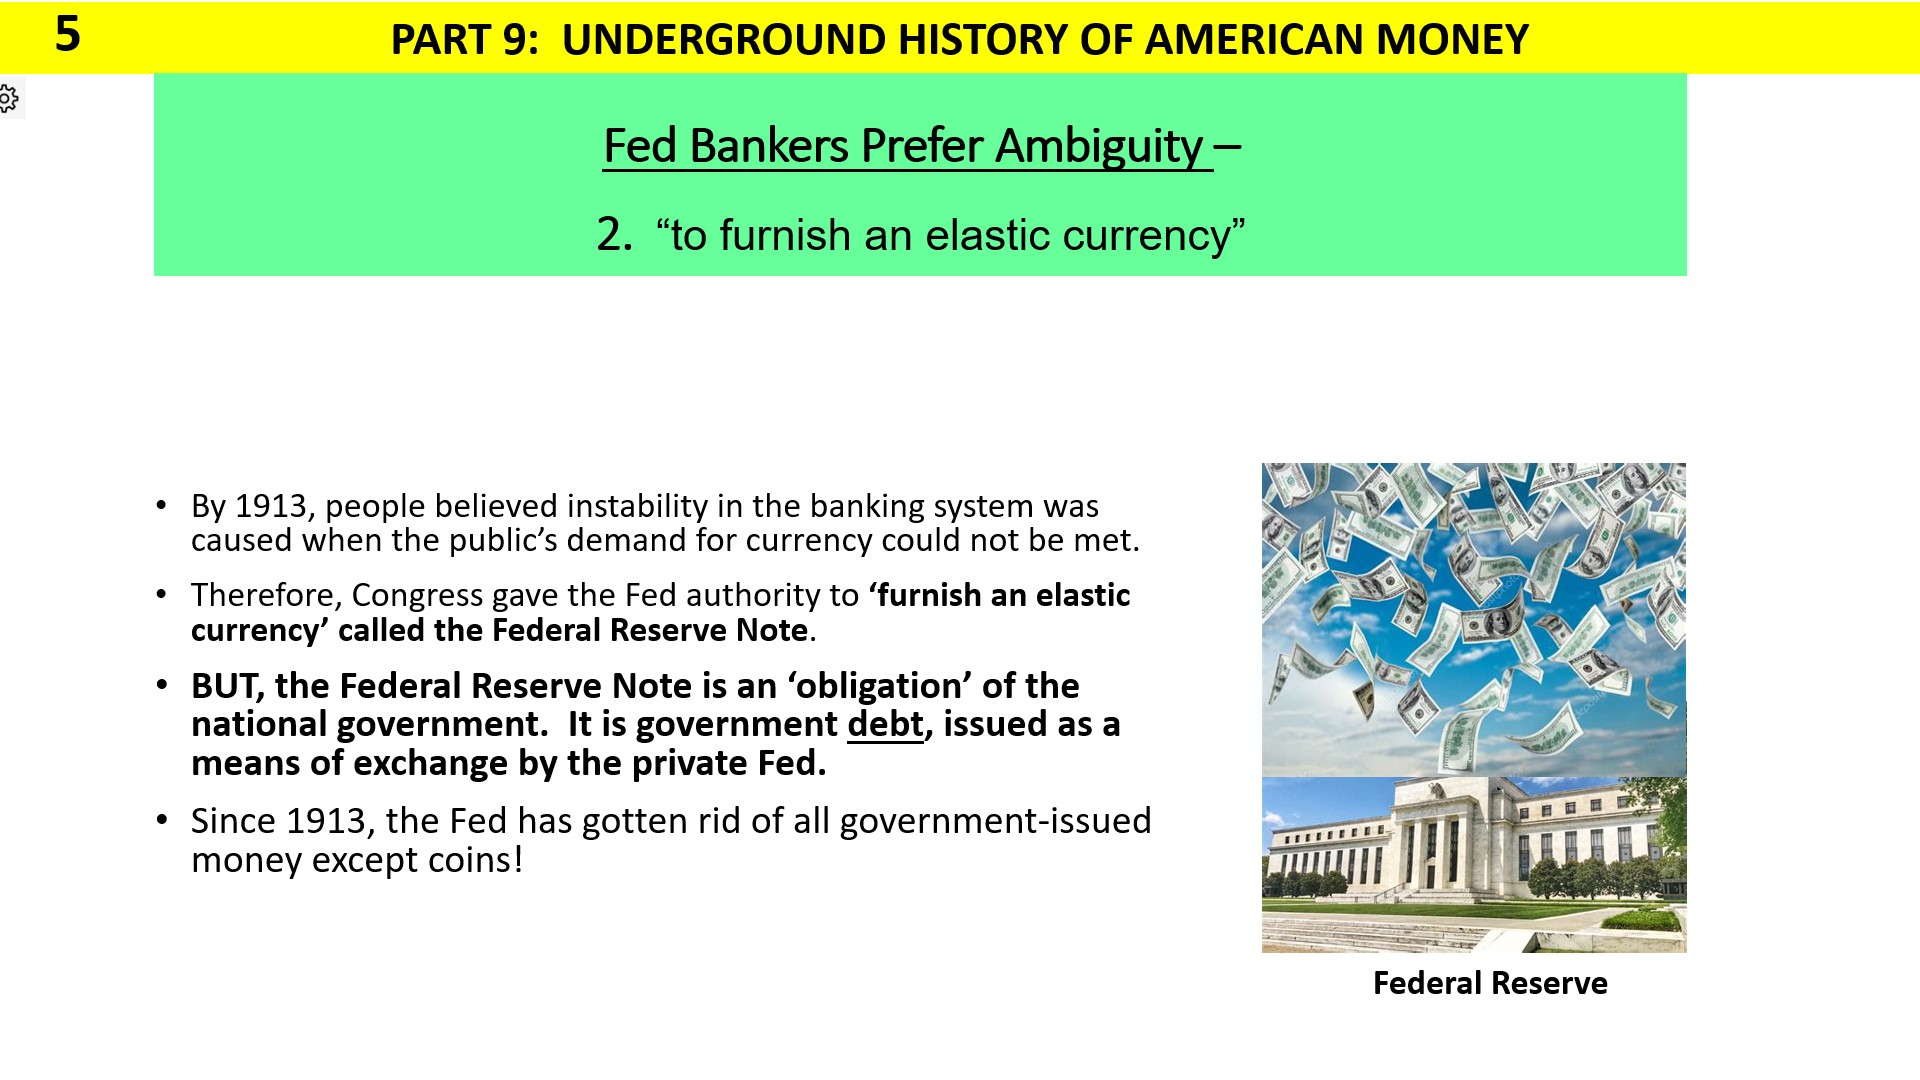 To furnish an elastic currency -- the federal reserve note